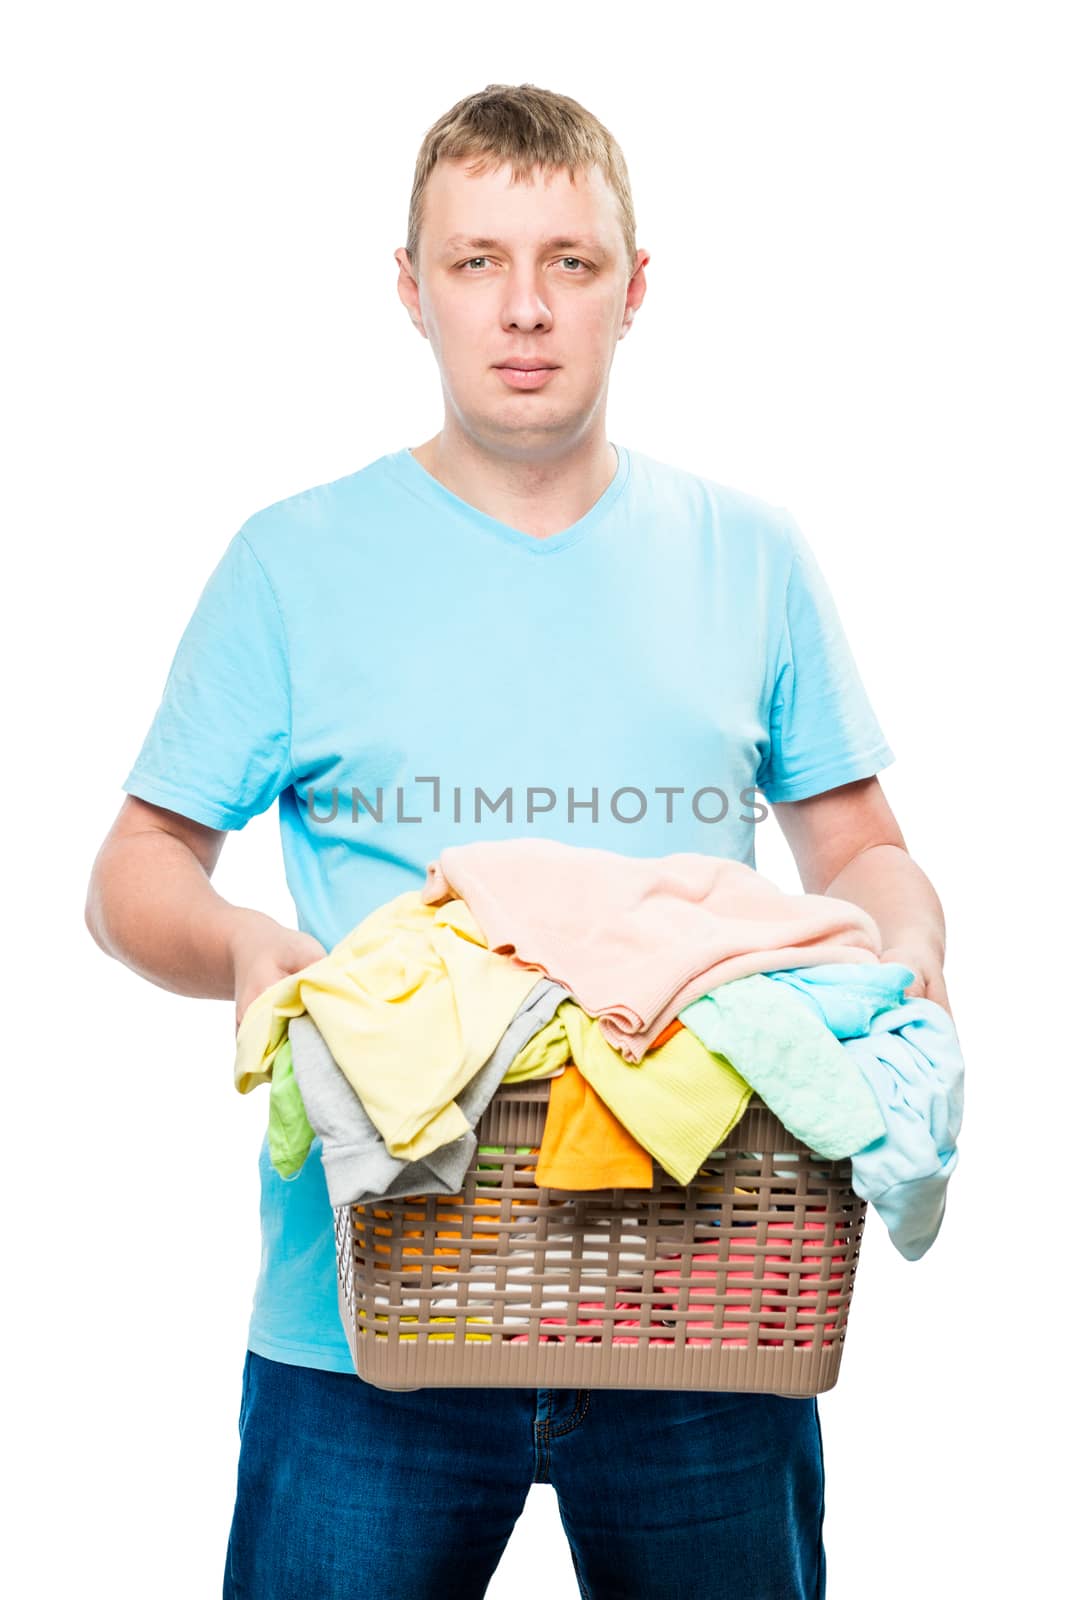 portrait of a man with a basket of clean laundry for ironing on by kosmsos111